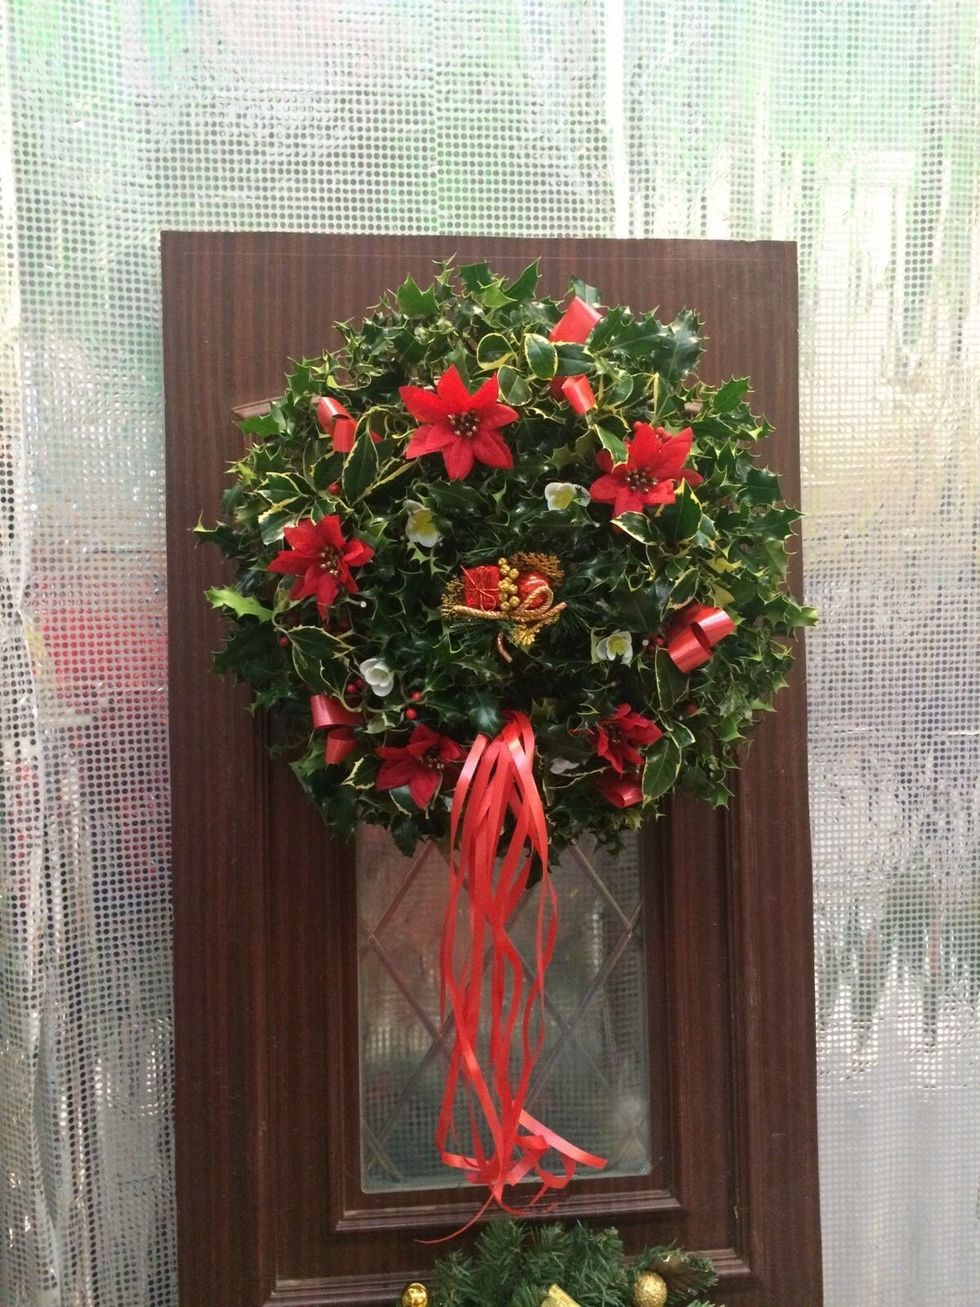 Christmas wreath with decorative red flowers and bows